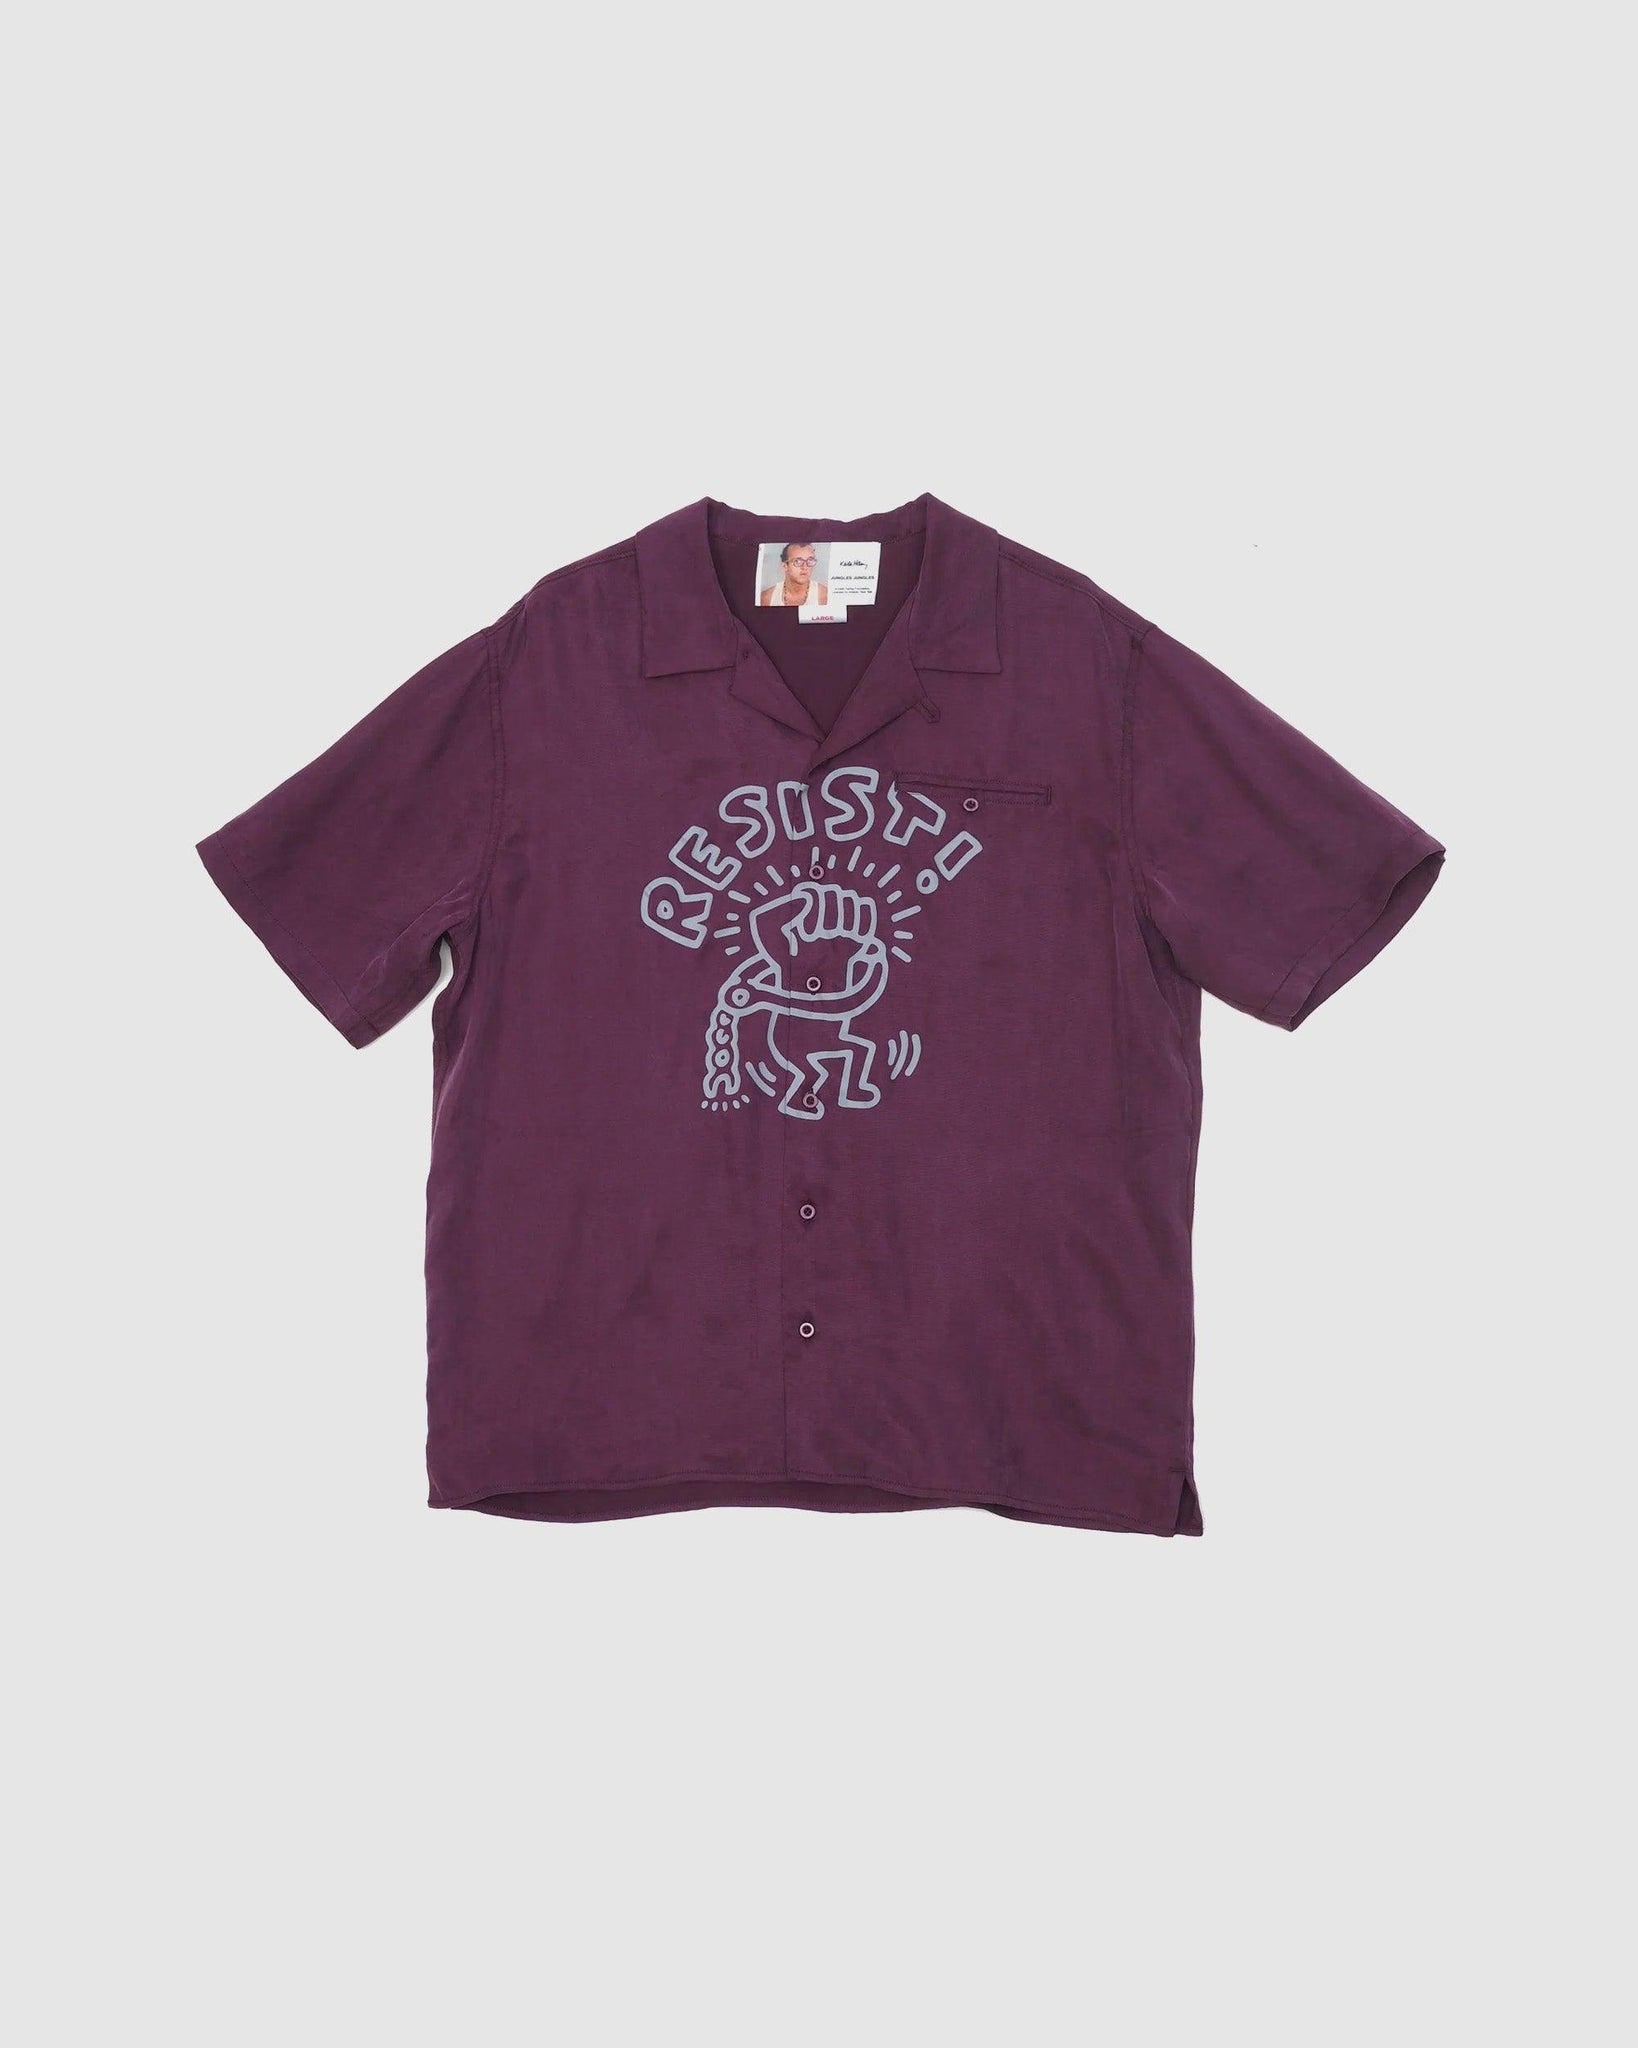 Resist Shirt - {{ collection.title }} - Chinatown Country Club 